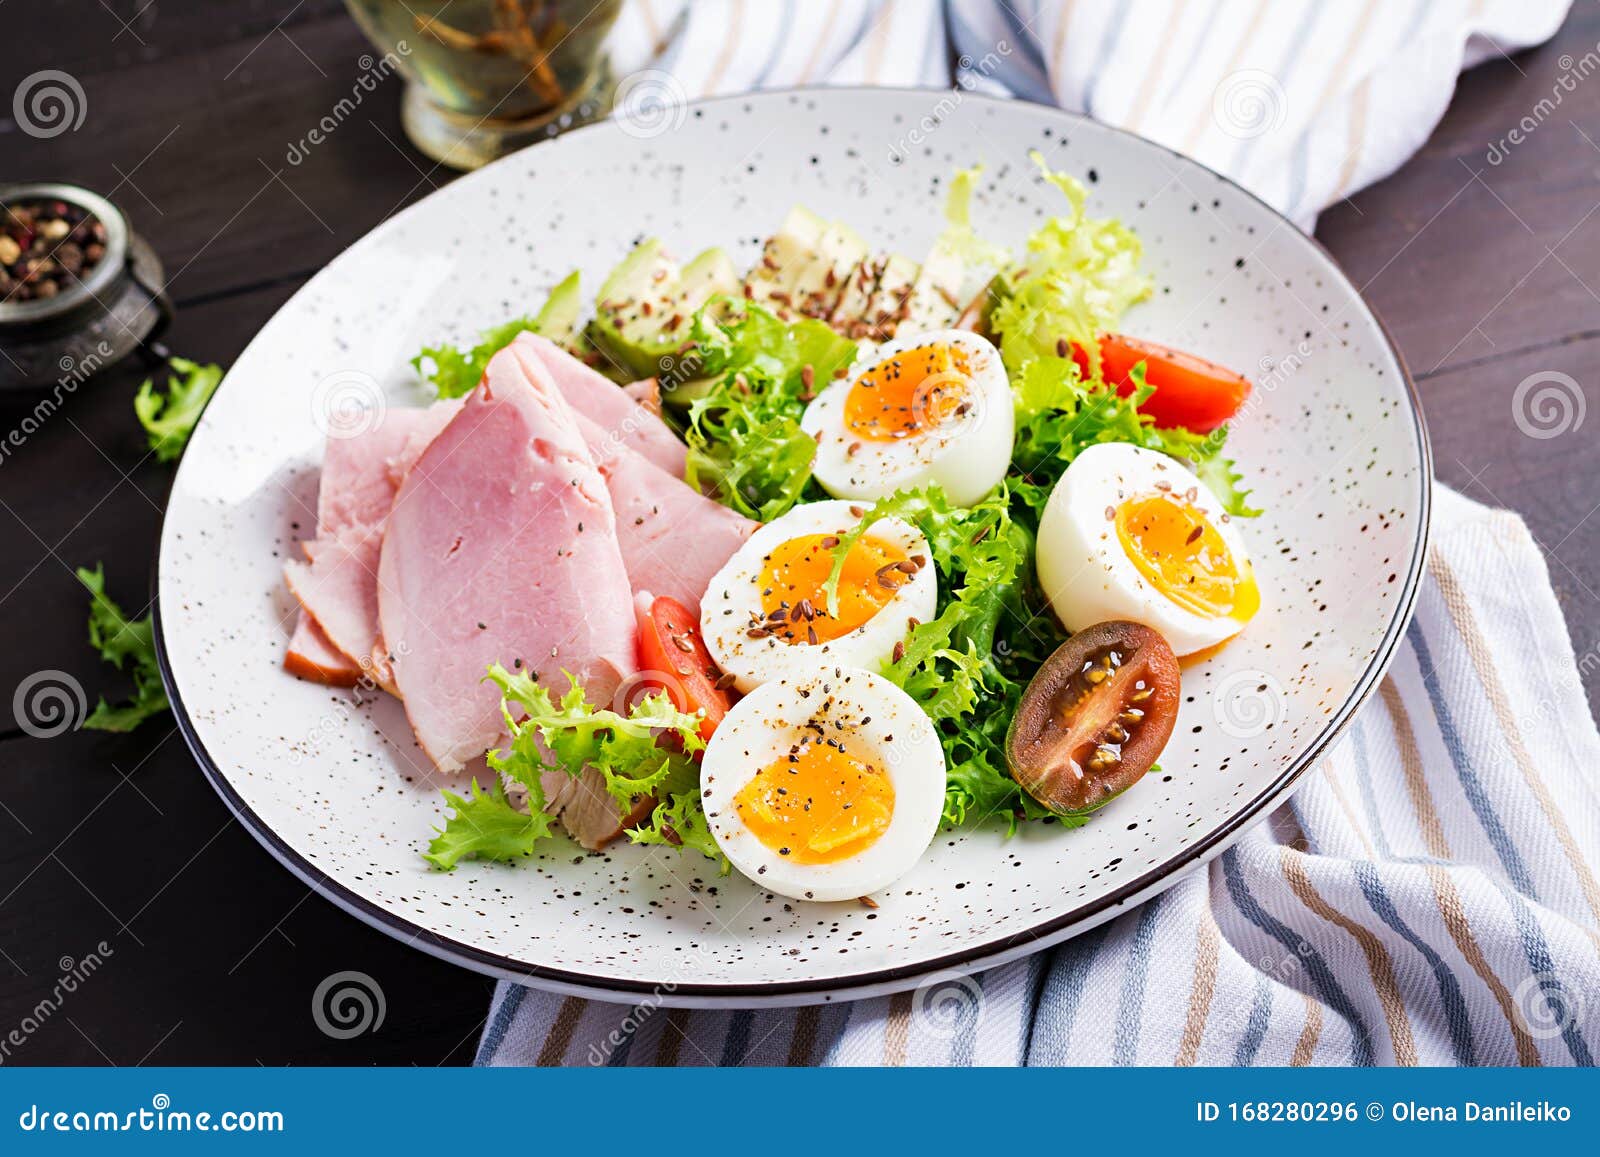 “Egg-citing Reasons to Make Eggs a Daily Staple in Your Paleo Diet!”